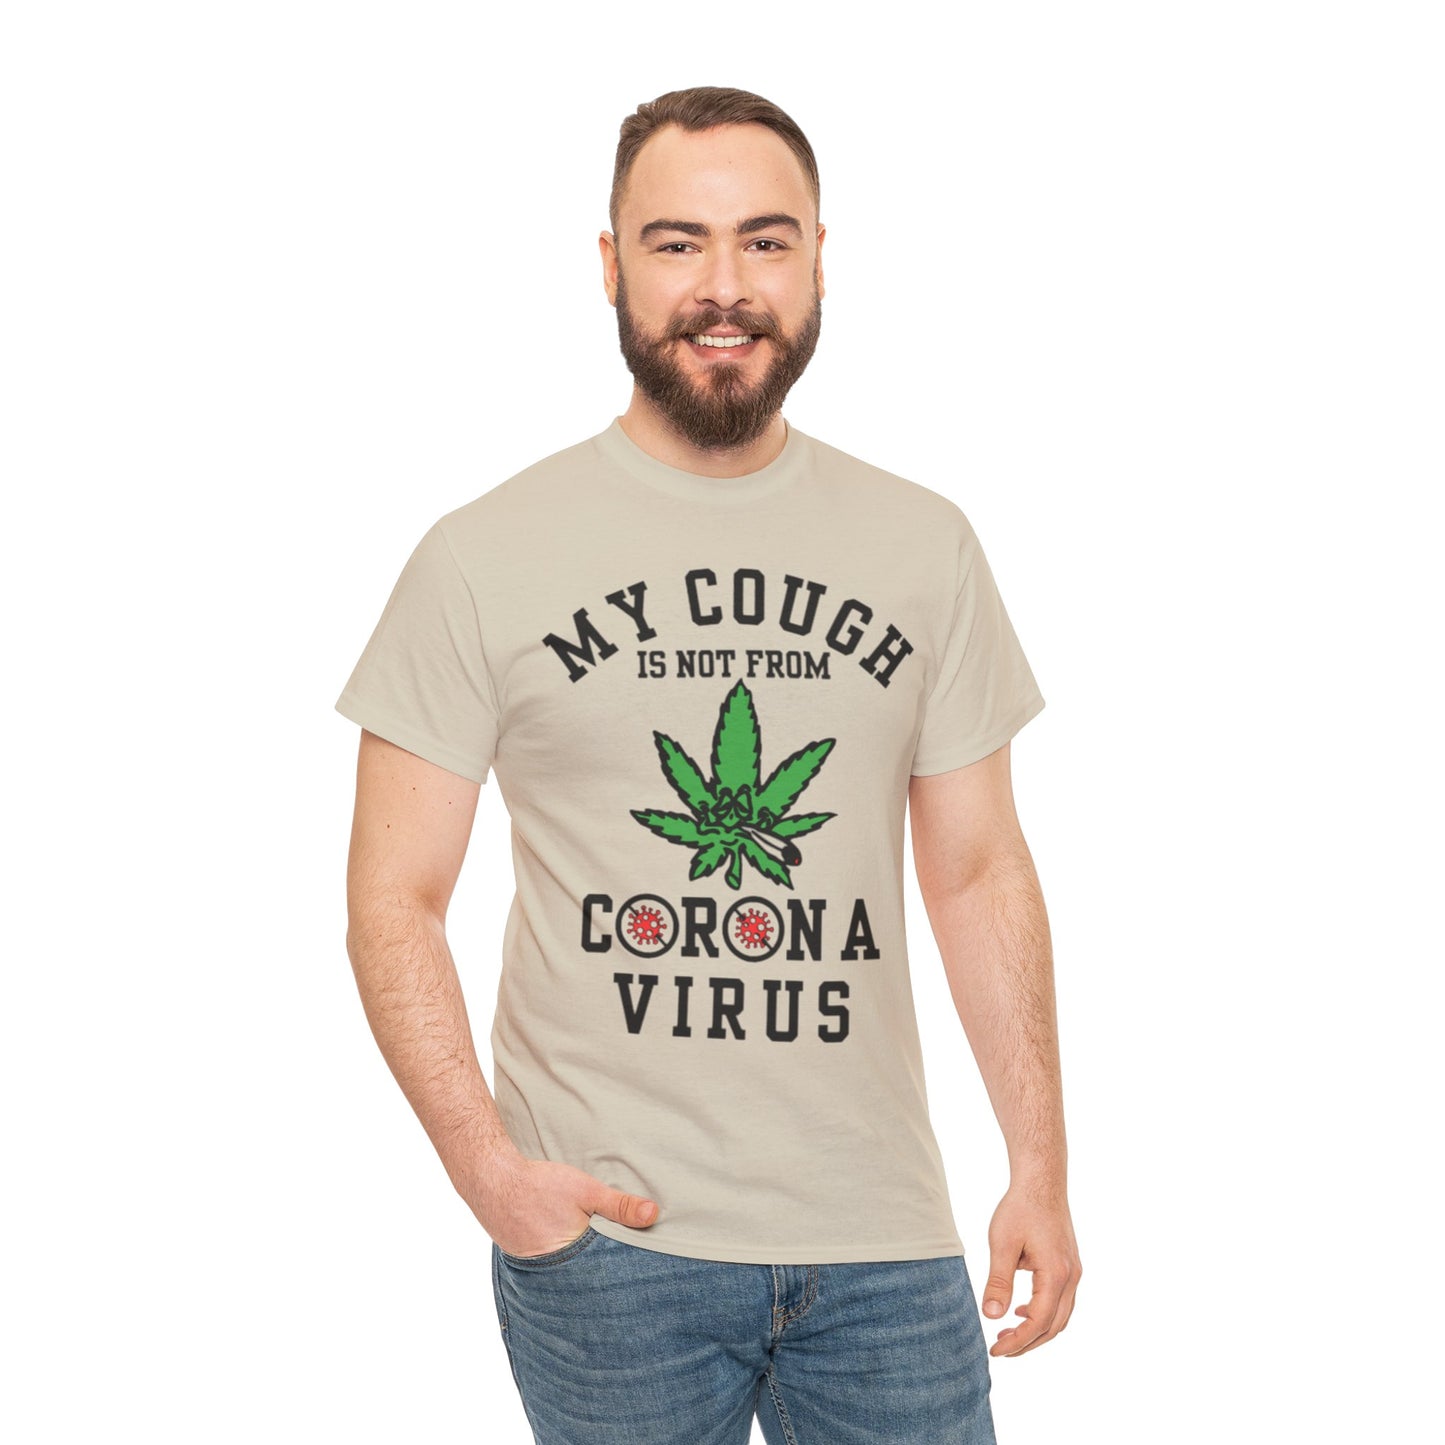 My Cough Is Not From Corona Virus Cotton Tee